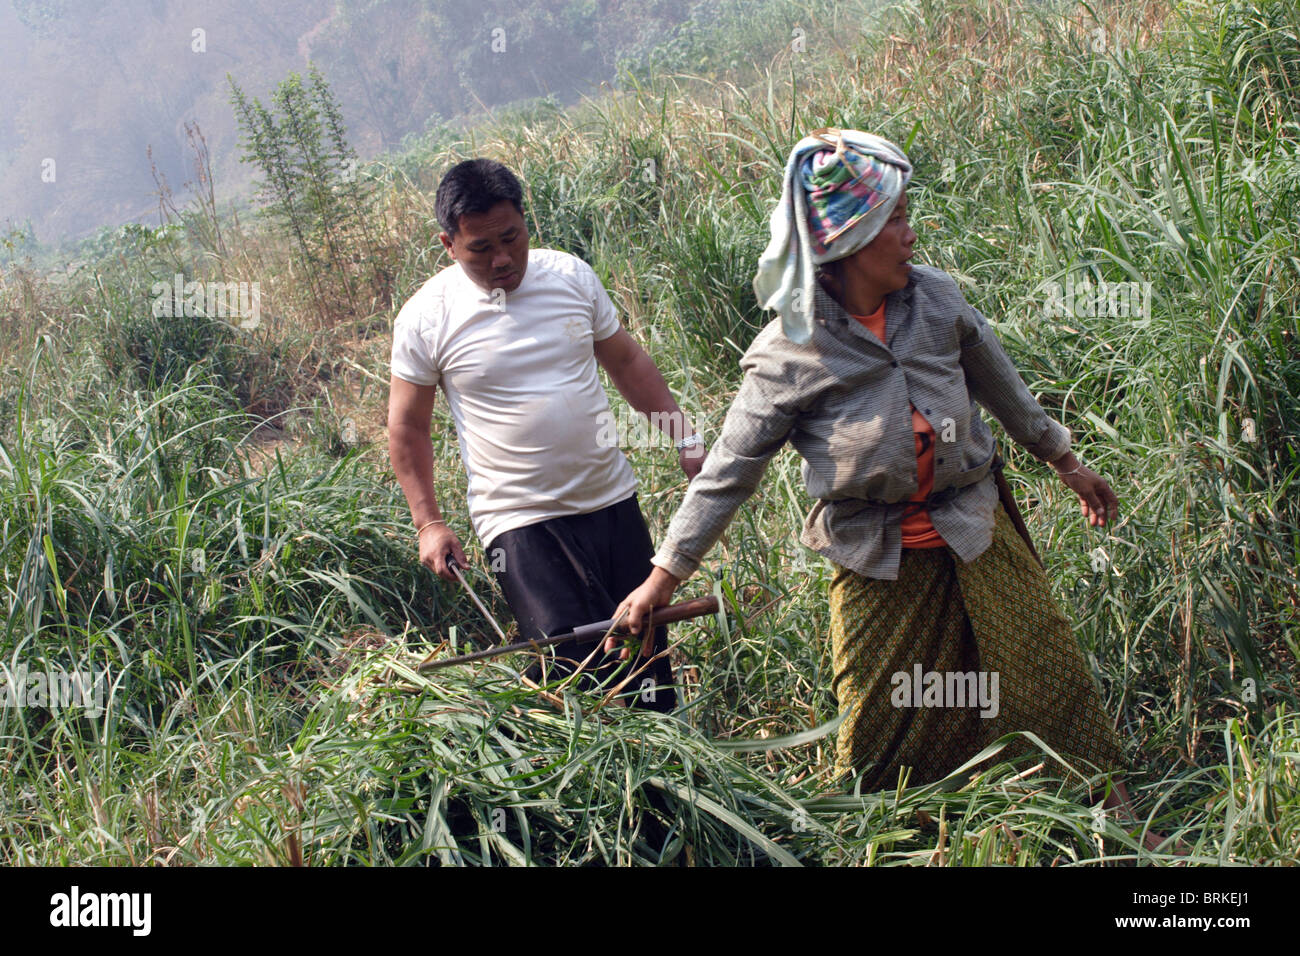 Two farmers, a man and a woman, are working in a tall and thick green grass field in Sappong (Pang Ma Pha) Northern Thailand. Stock Photo